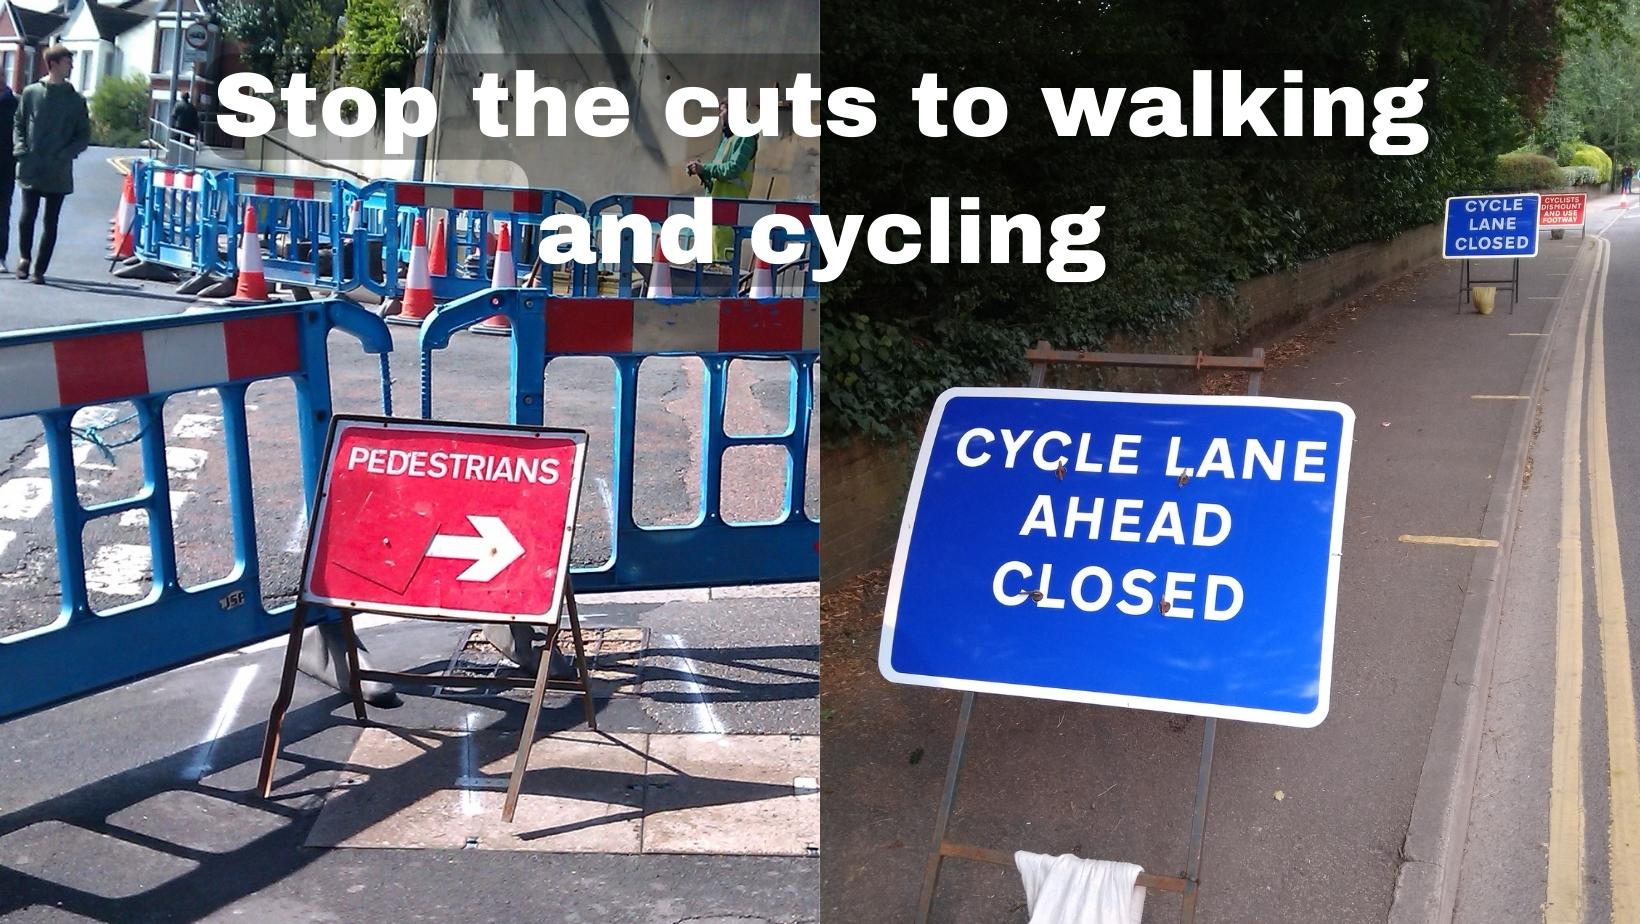 Photo, captioned "stop the cuts to walking and cycling", showing closed footpaths and cycle lanes